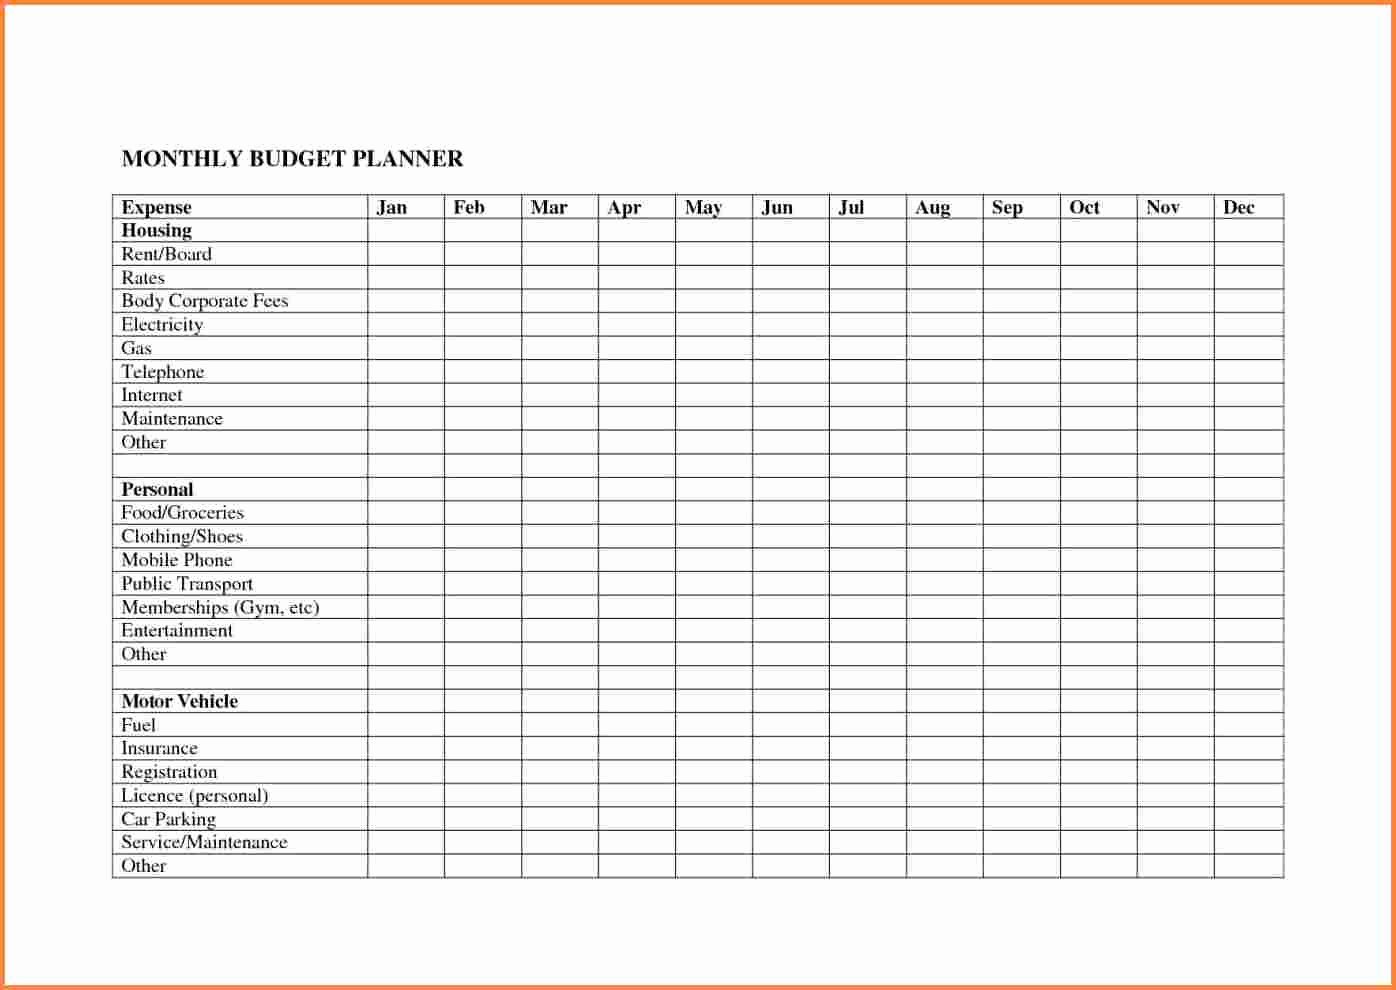 Monthly Budget Excel Spreadsheet Template Fresh 10 Monthly Bud Planner Spreadsheet